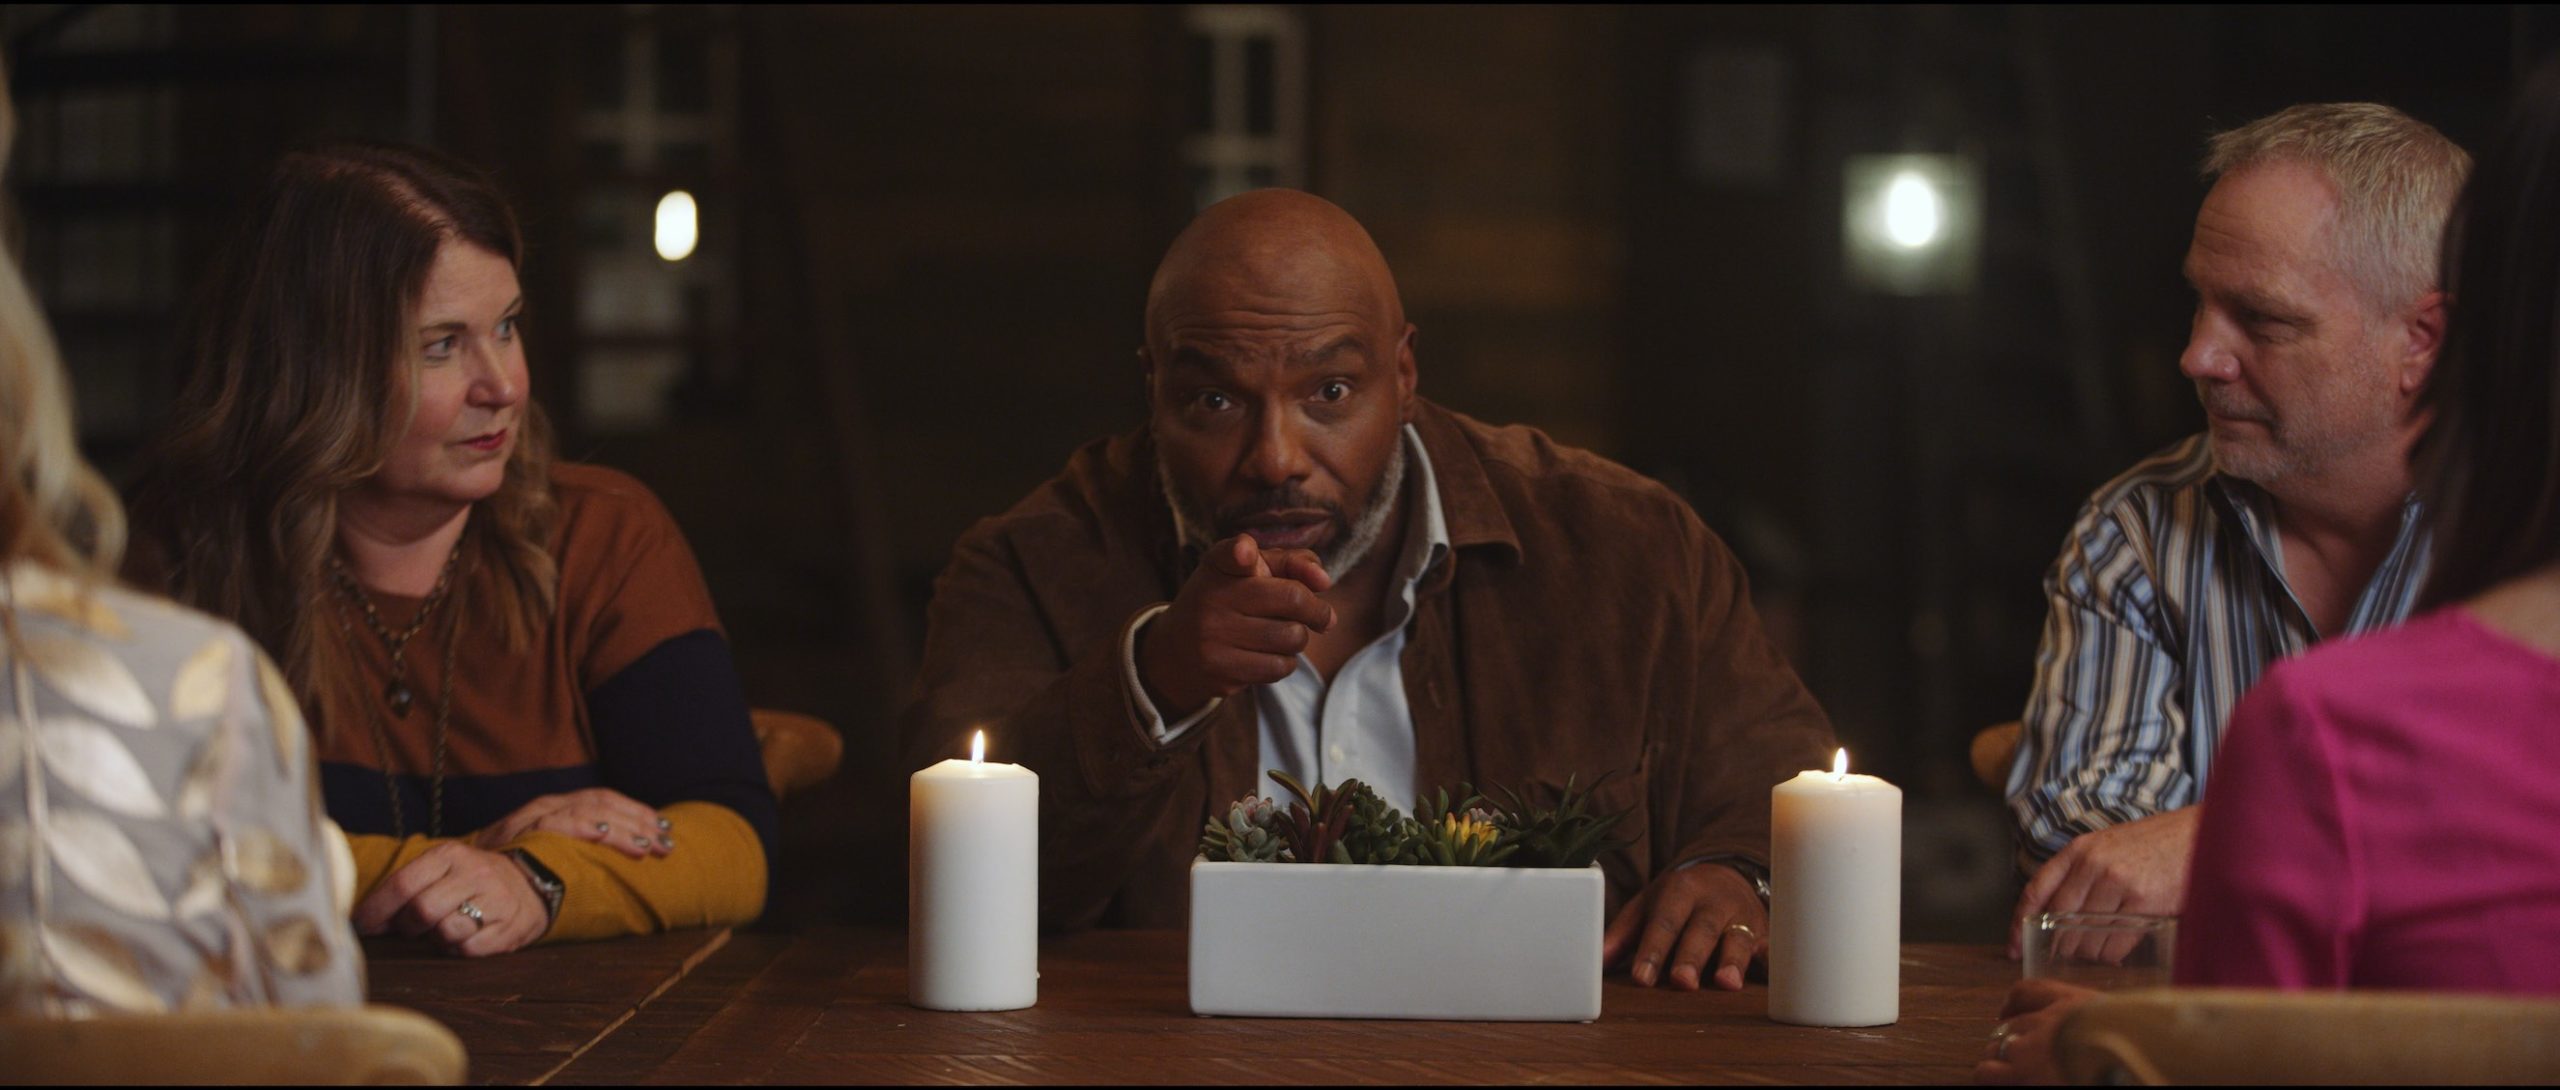 MRINetwork Company Video Lets Start Building African American man pointing finger at camera surrounded by a man and three women at a table with two white lit candles and small planter